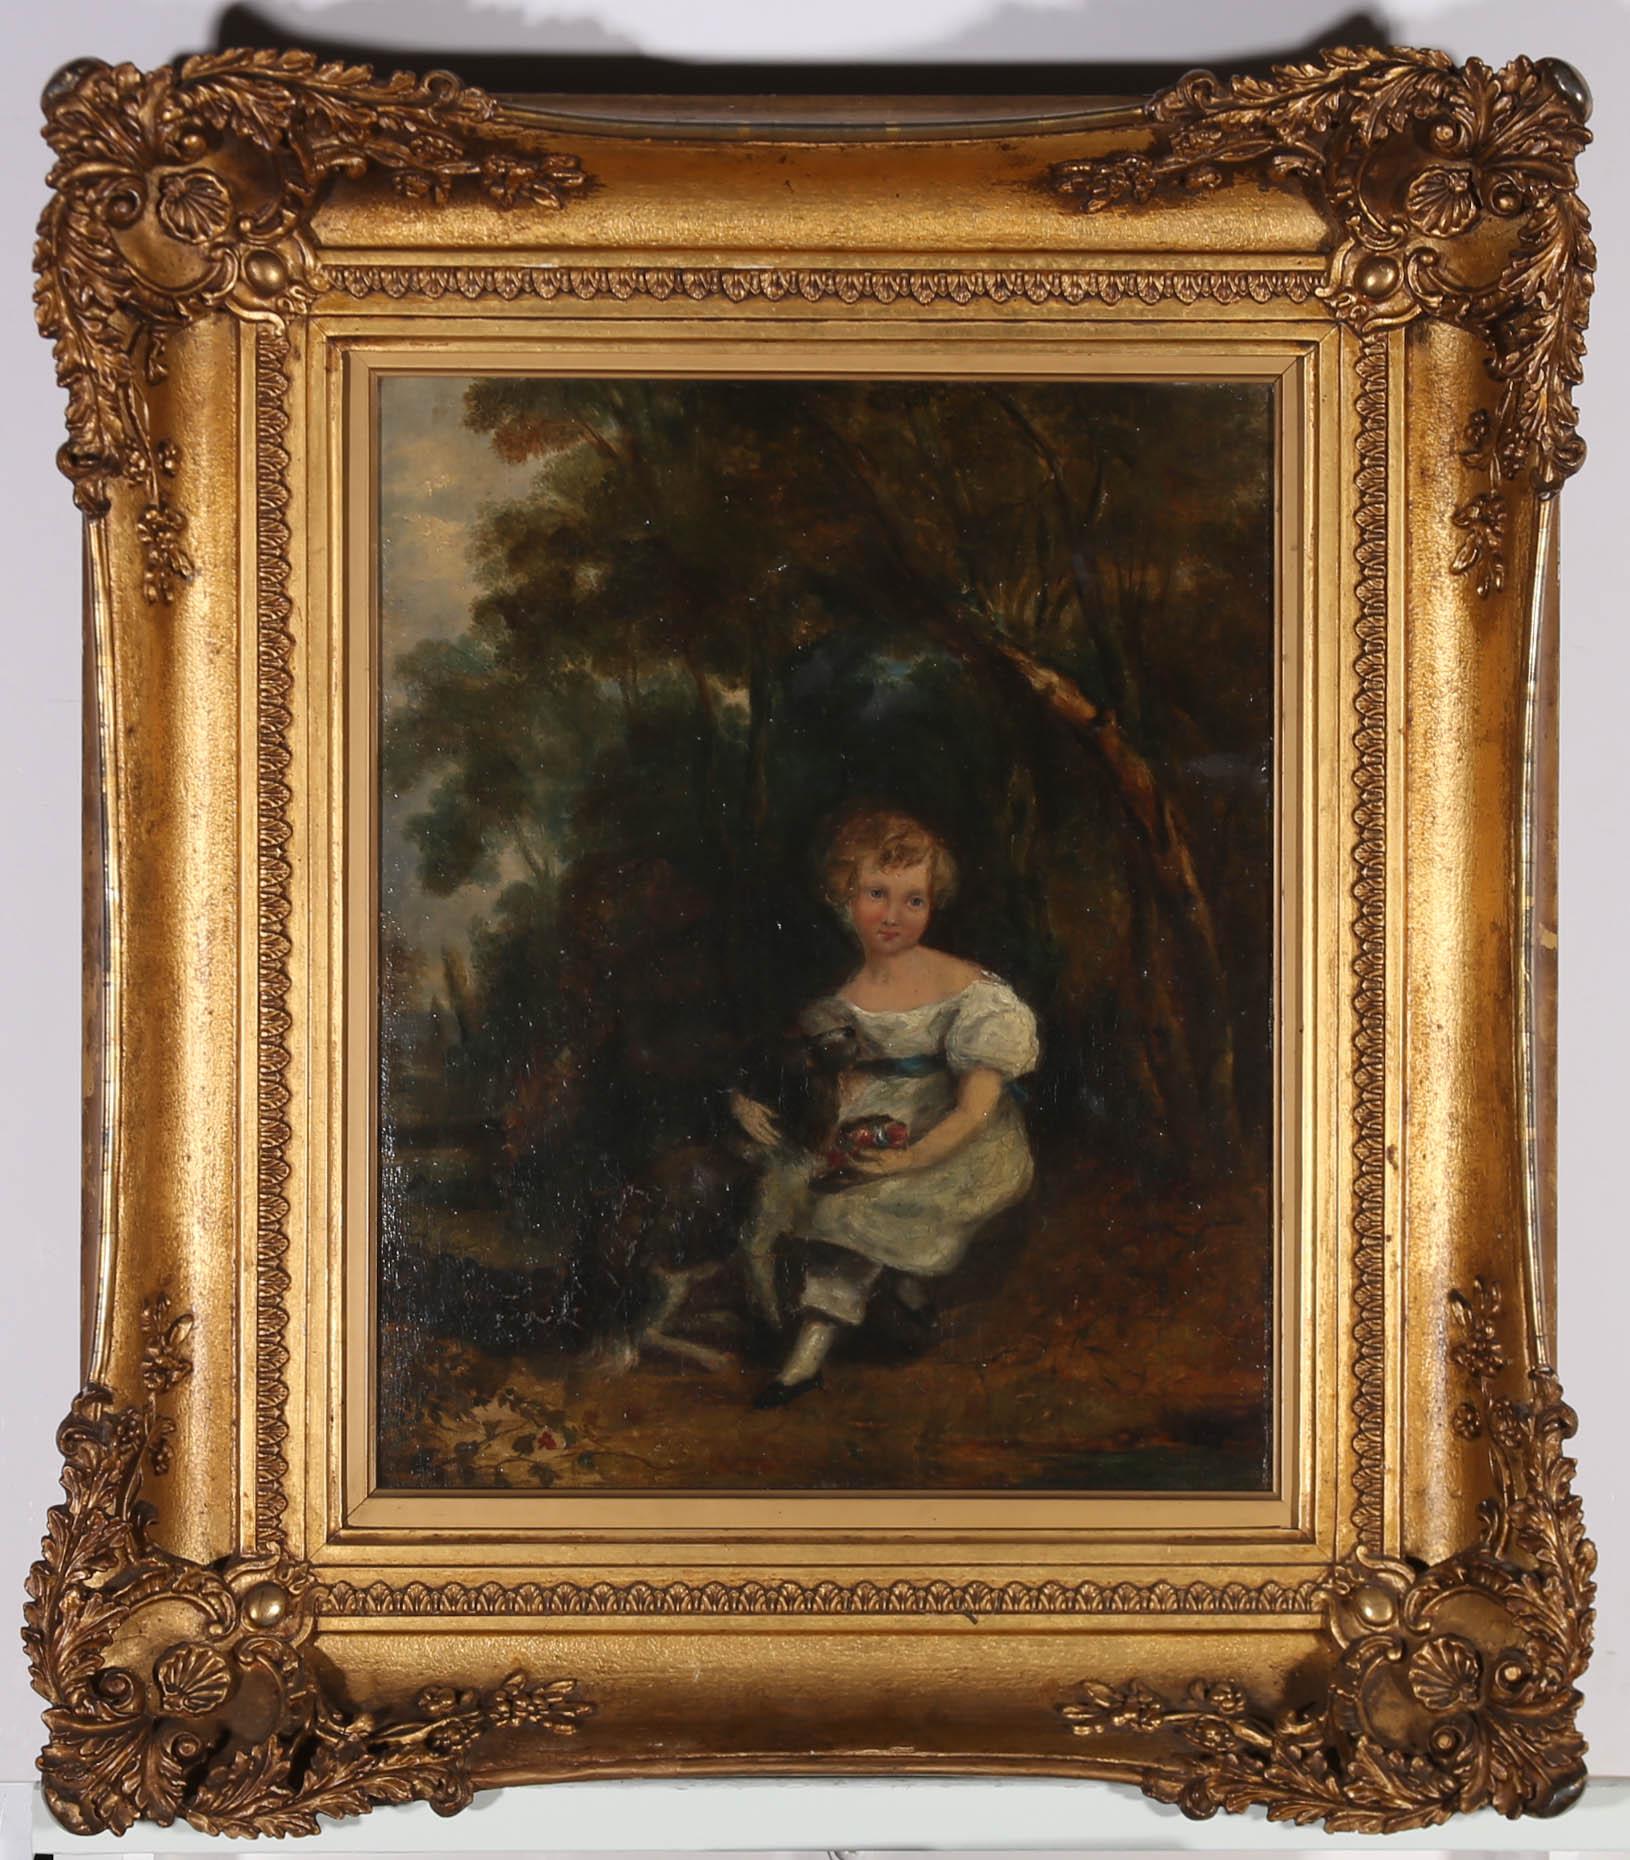 A fine early 19th Century portrait in oil, showing a young boy in traditional smock dress and trousers, holding a posy of flowers as his little dog rests its head lovingly in his lap. The painting is unsigned and presented in a substantial late 19th